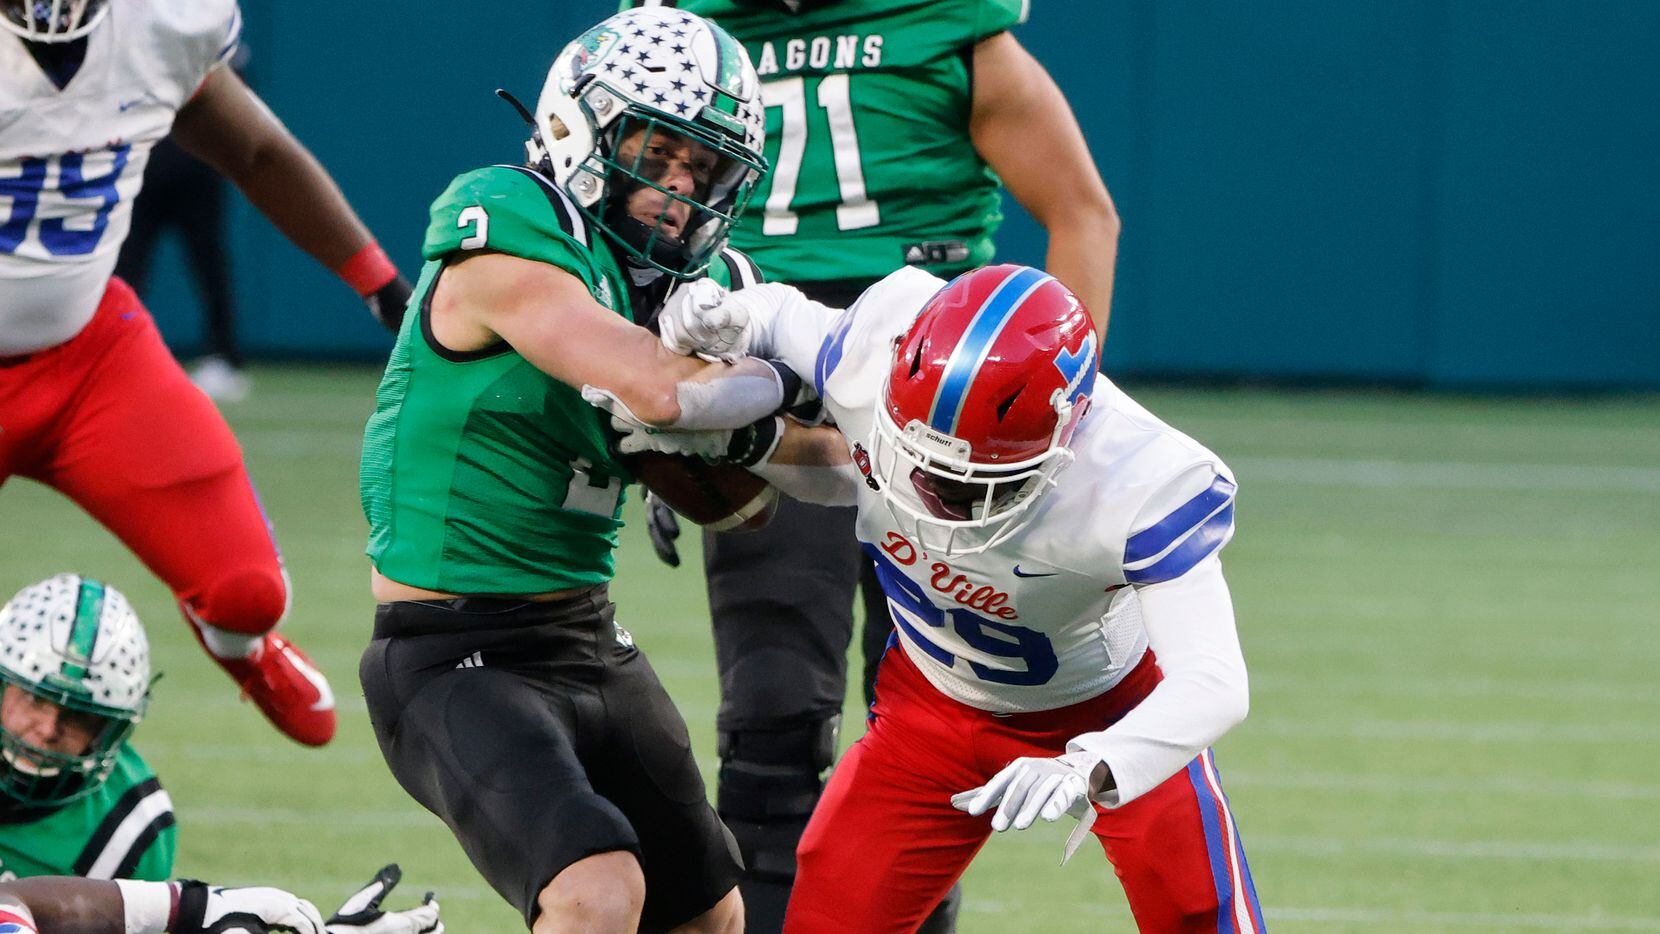 Southlake running back Owen Allen bounces off an attempted tackle by Duncanville defender Willie Angton Jr. (29) to score a touchdown during the Class 6A Division I state high school football semifinal in Arlington, Texas on Jan. 9, 2020. (Michael Ainsworth)